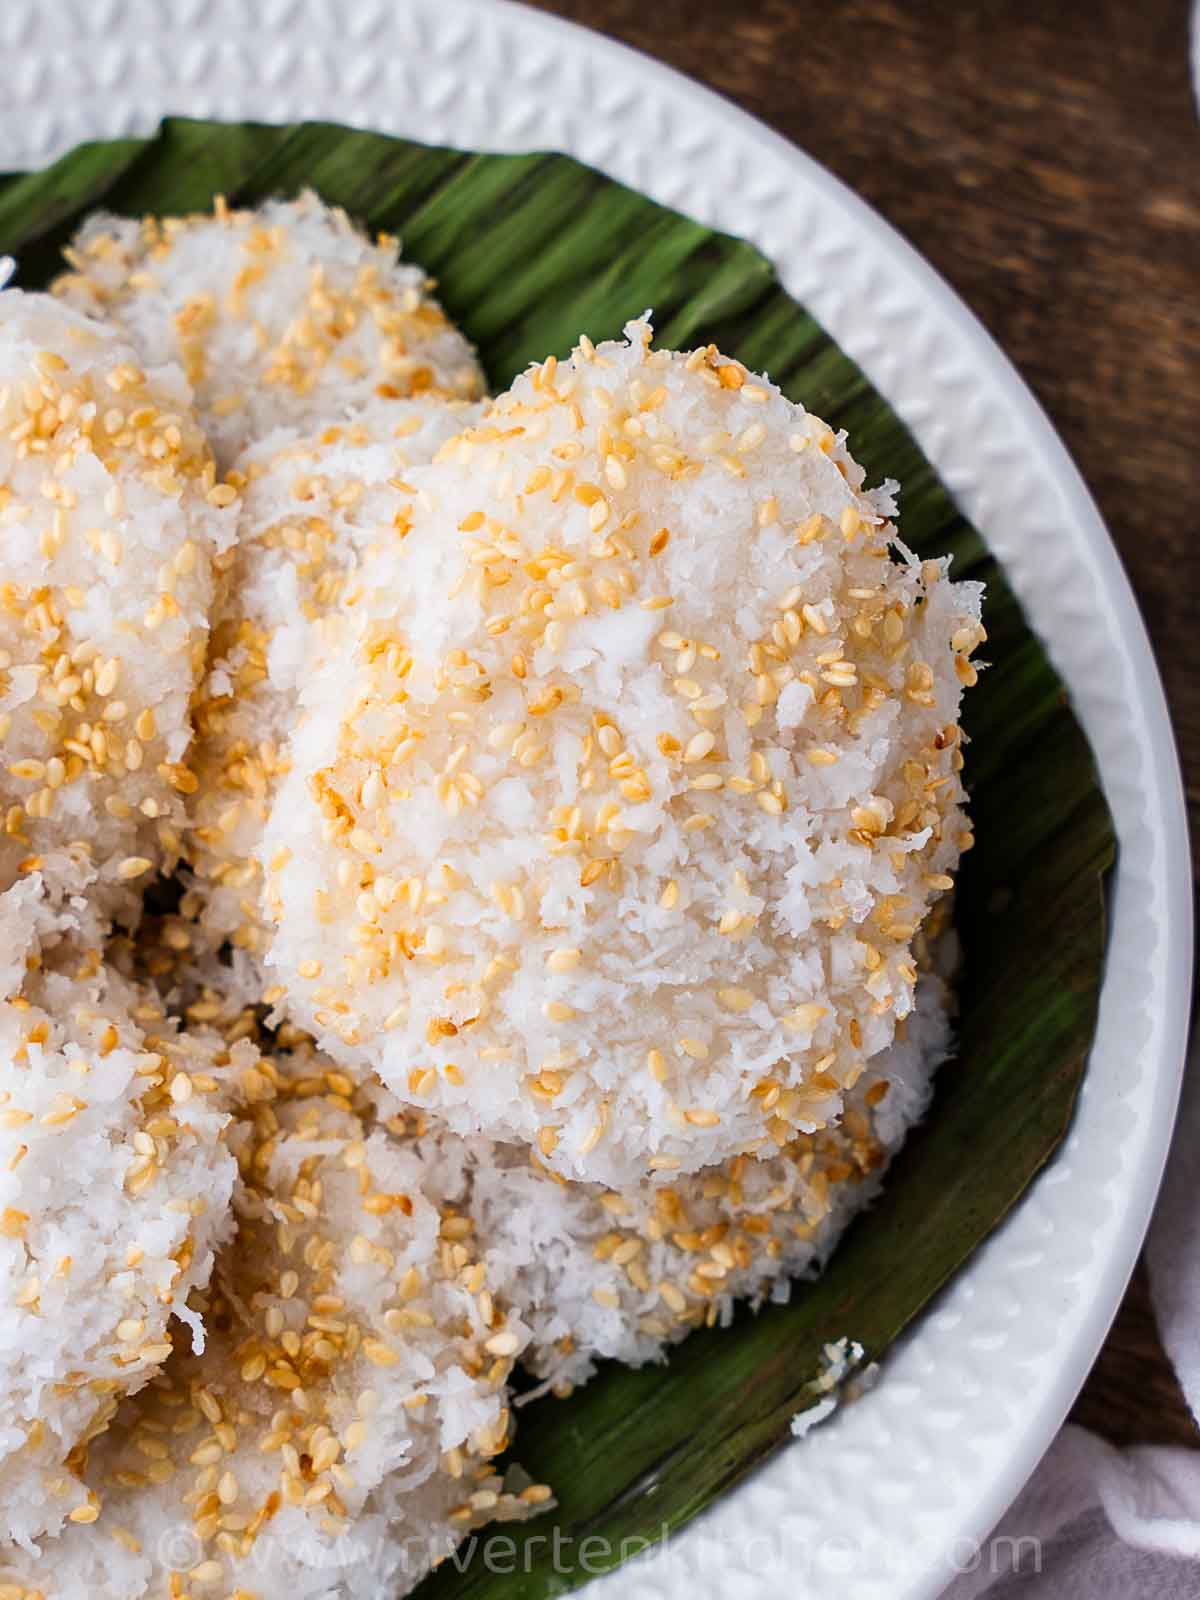 palitaw glutinous rice cakes with coconut, sugar and sesame seeds.